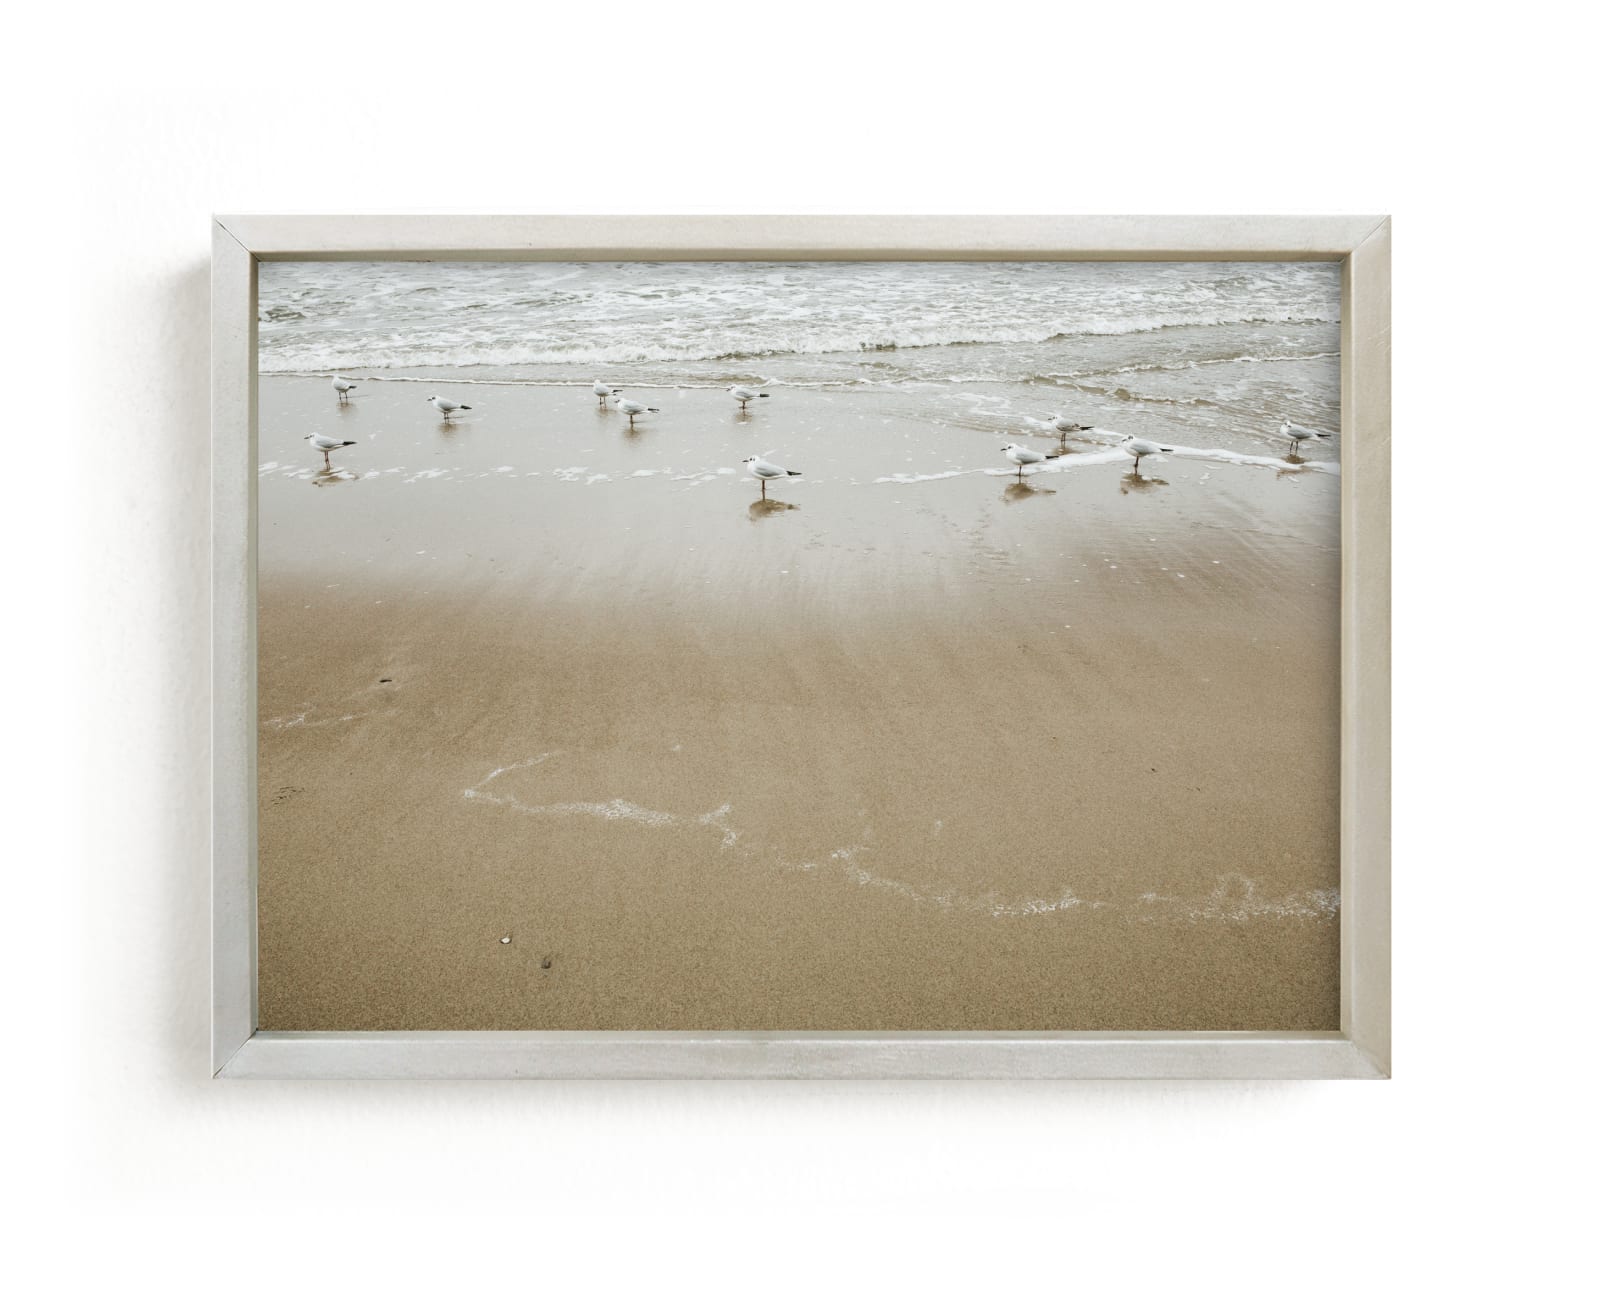 "By the sea - Seagulls " by Lying on the grass in beautiful frame options and a variety of sizes.